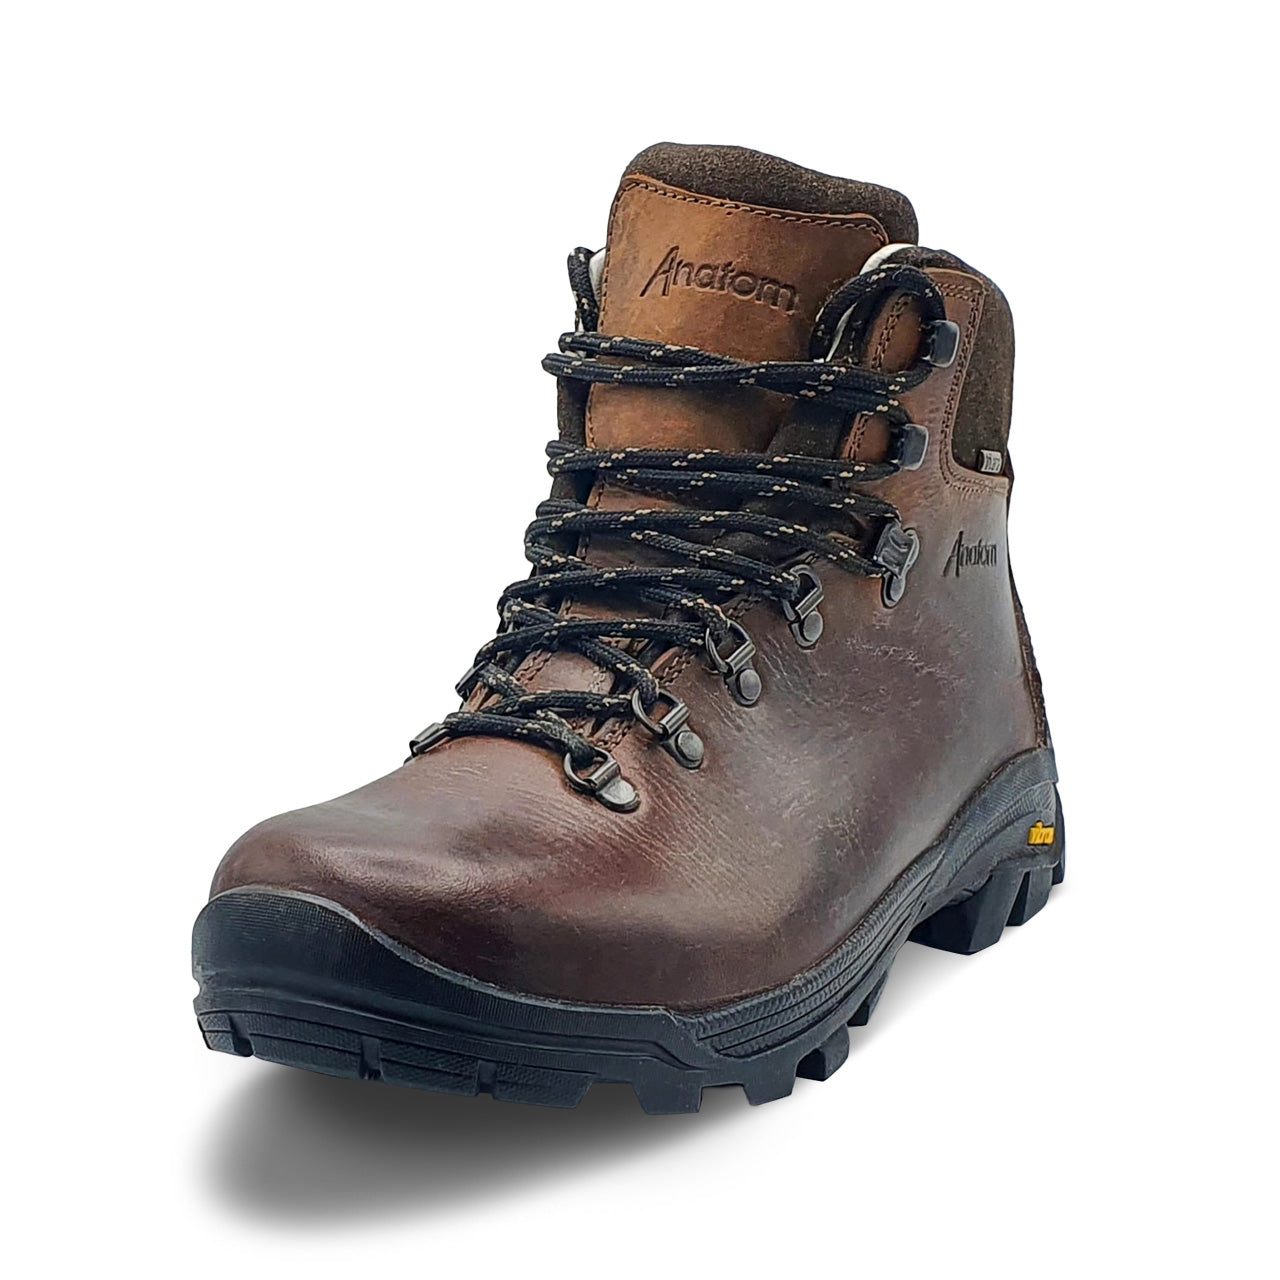 ANATOM Q2 Classic Comfort Hiking Boots with Vibram outsole.